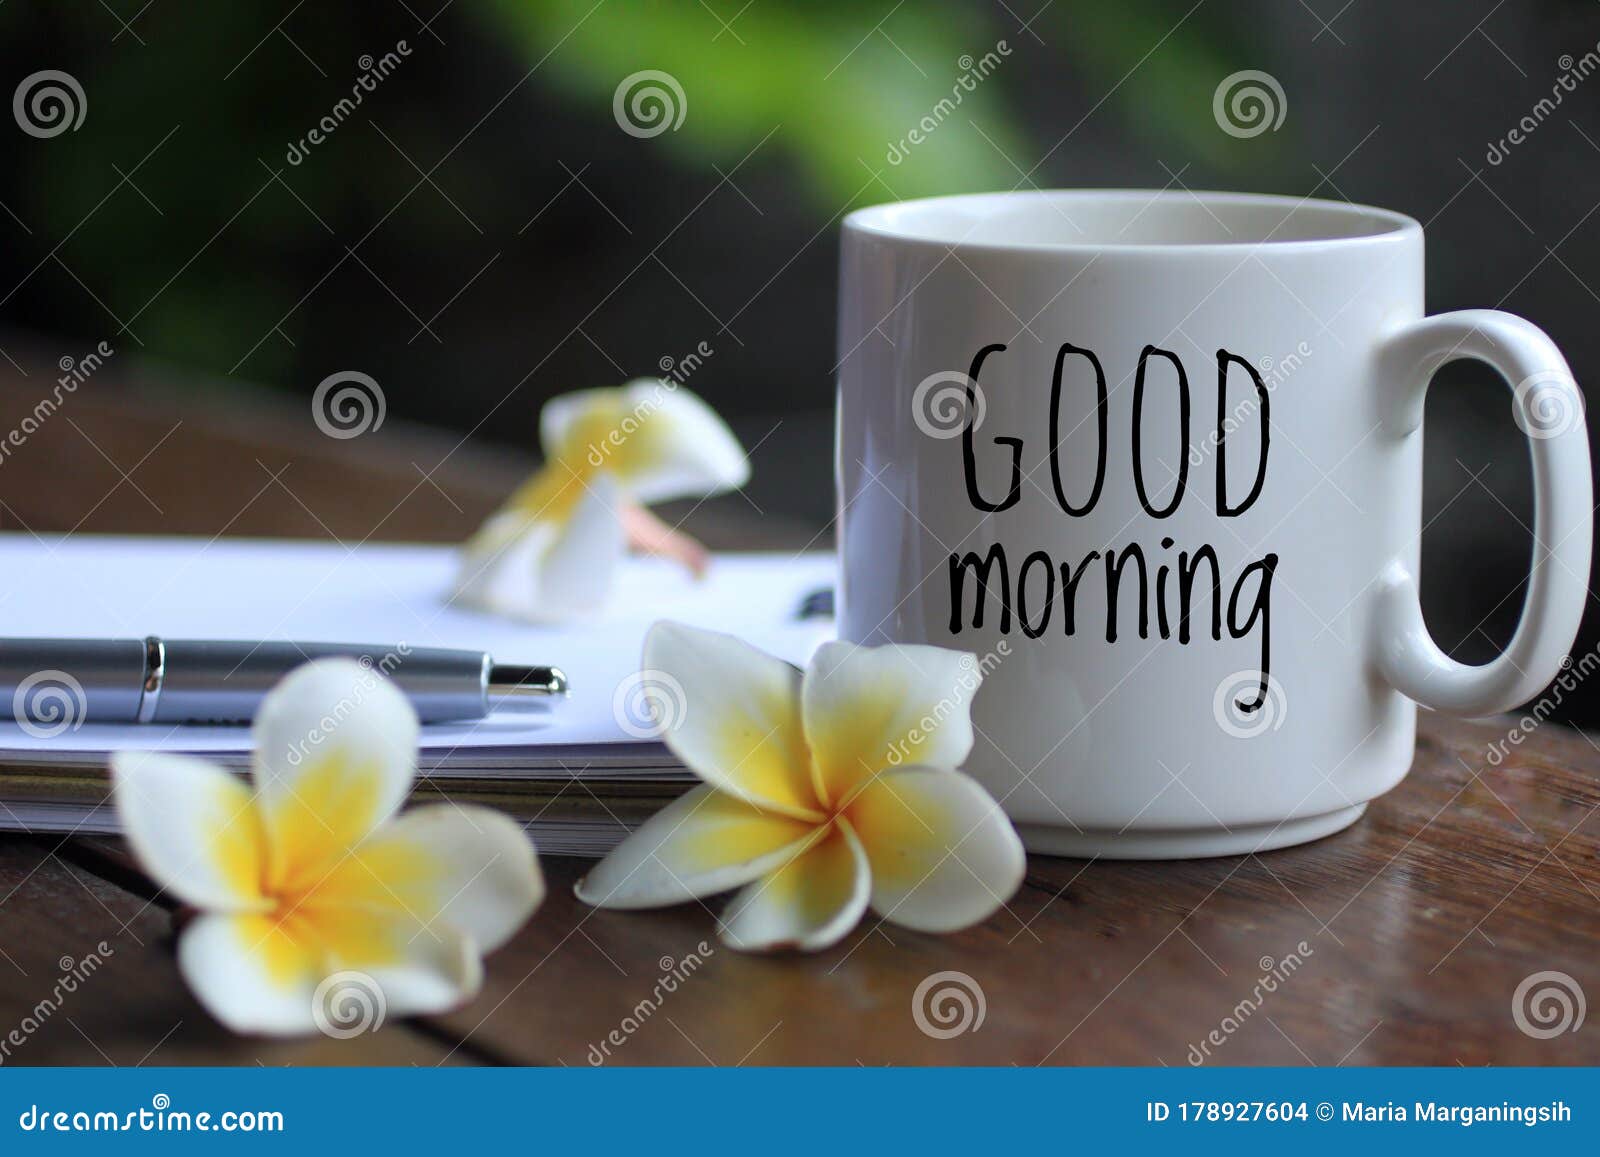 Good Morning Text Greeting on a Cup of Morning Coffee with Bali ...